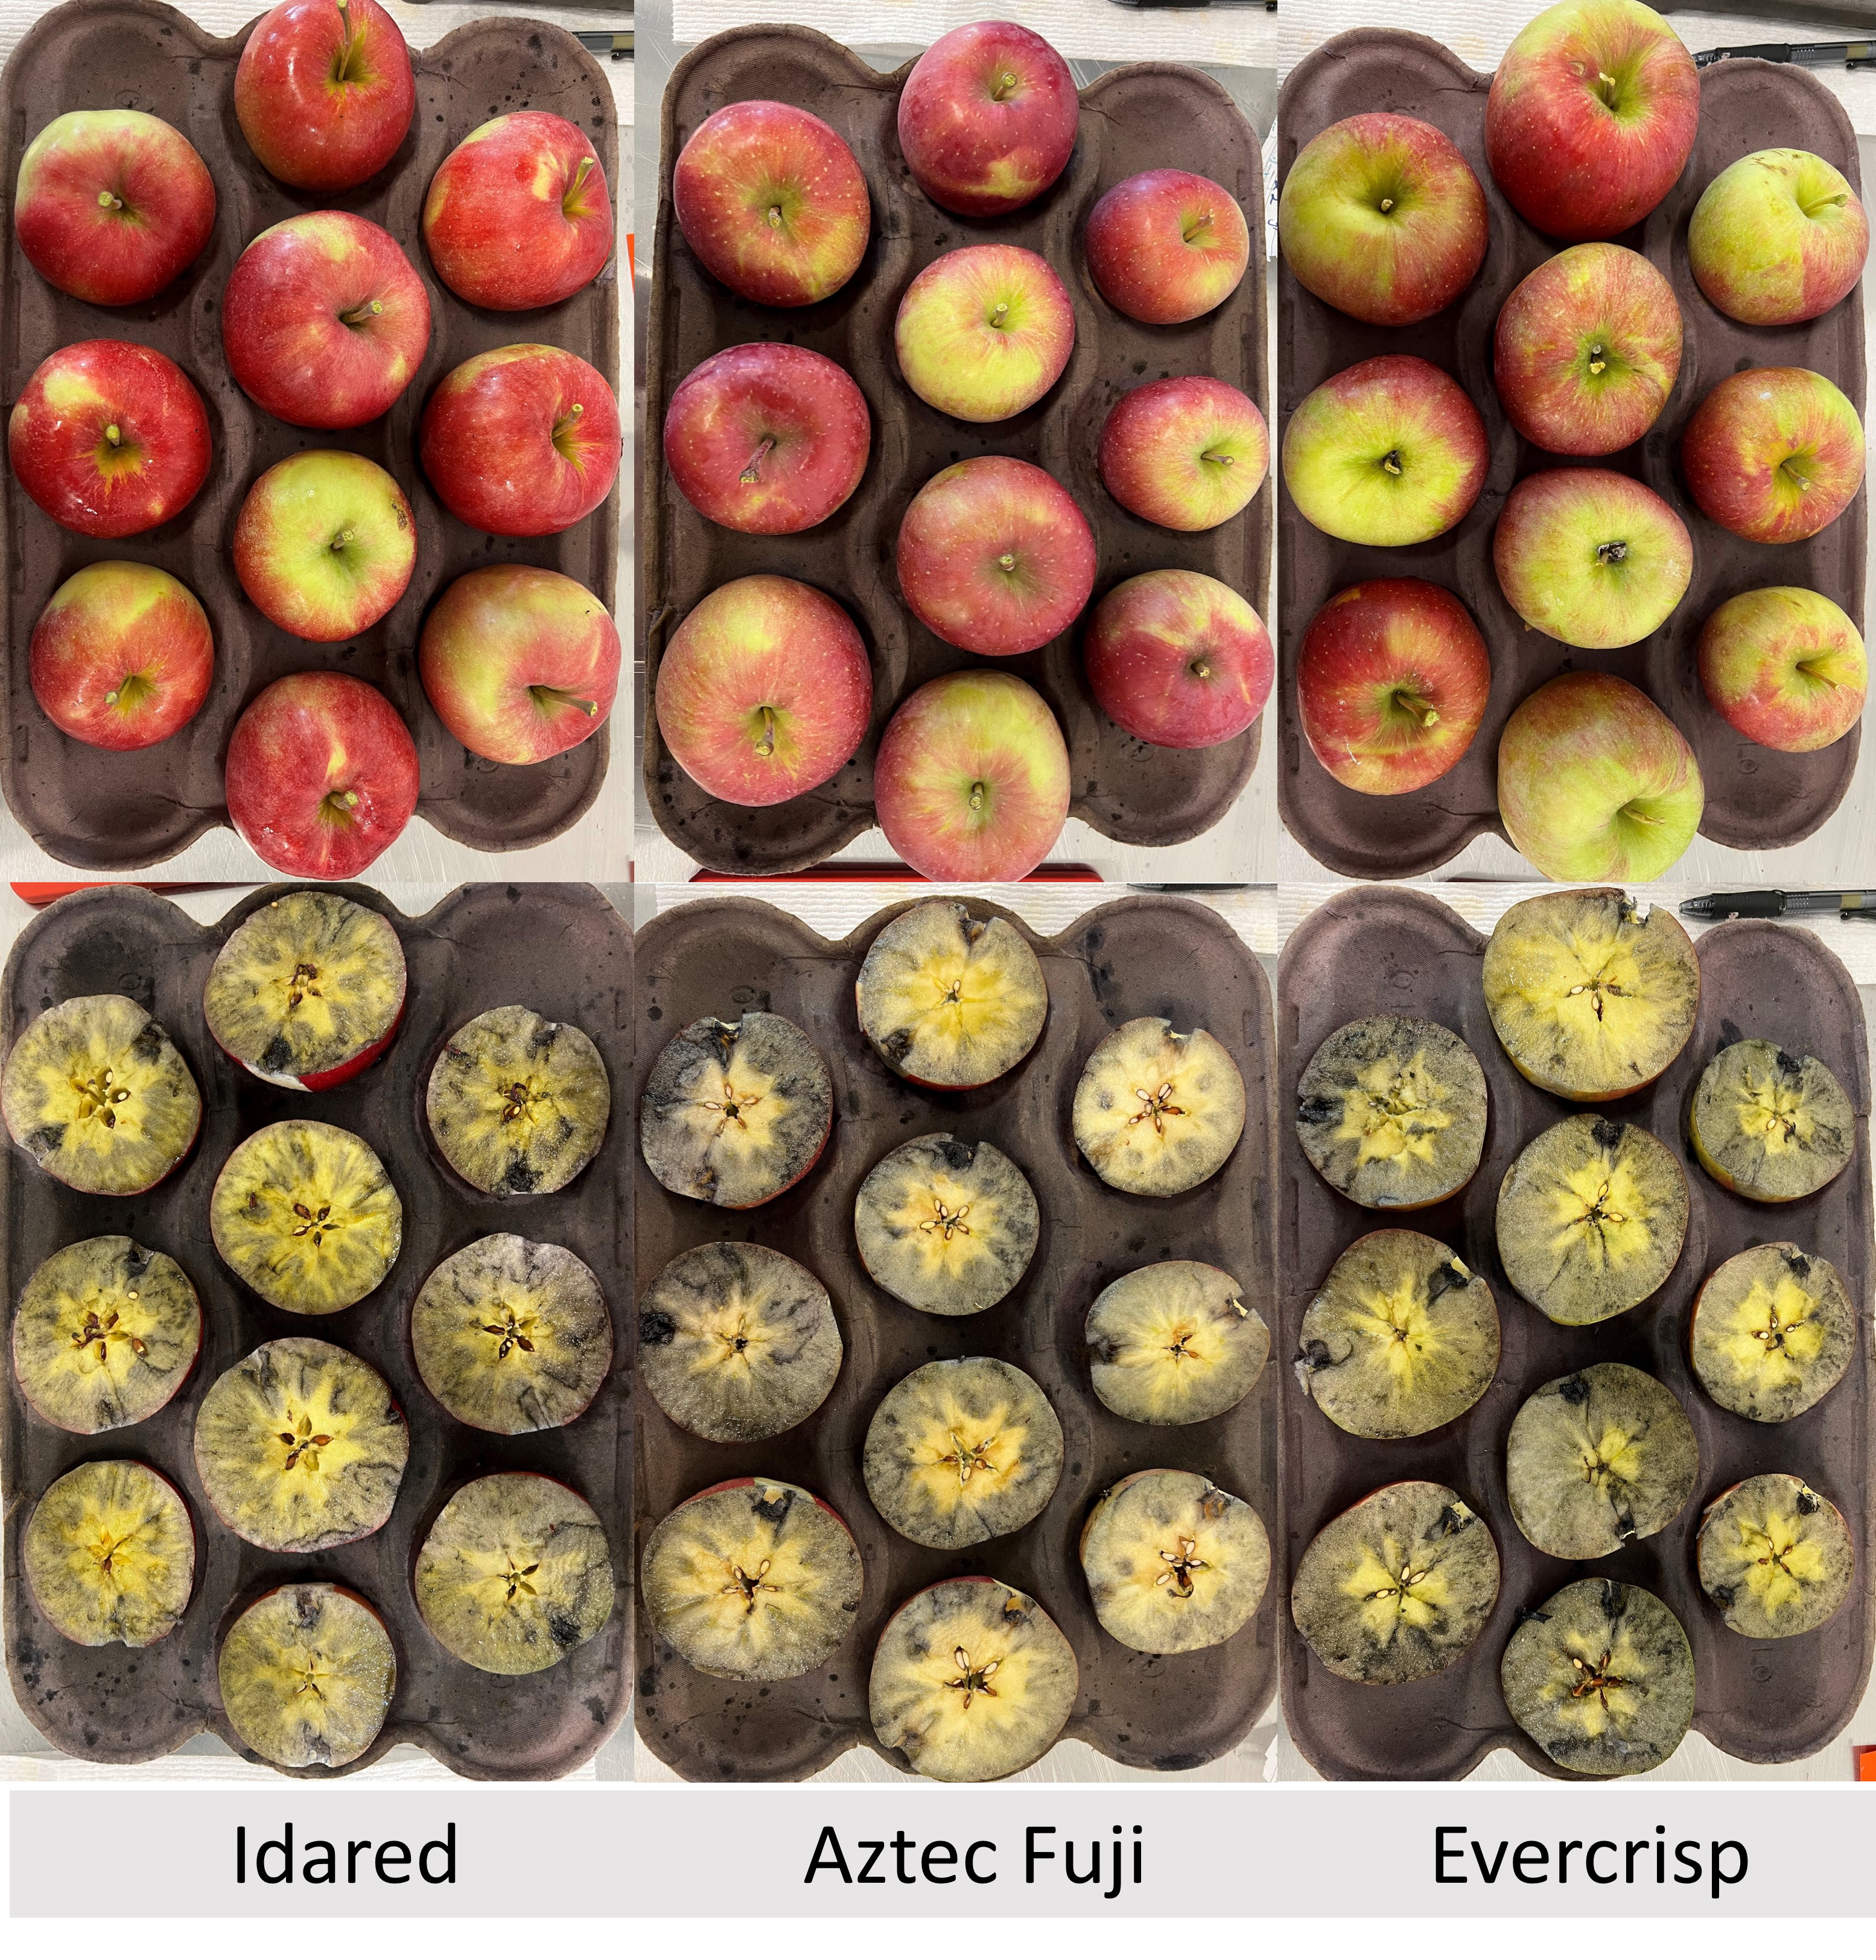 Maturity testing and starch staining of apples.